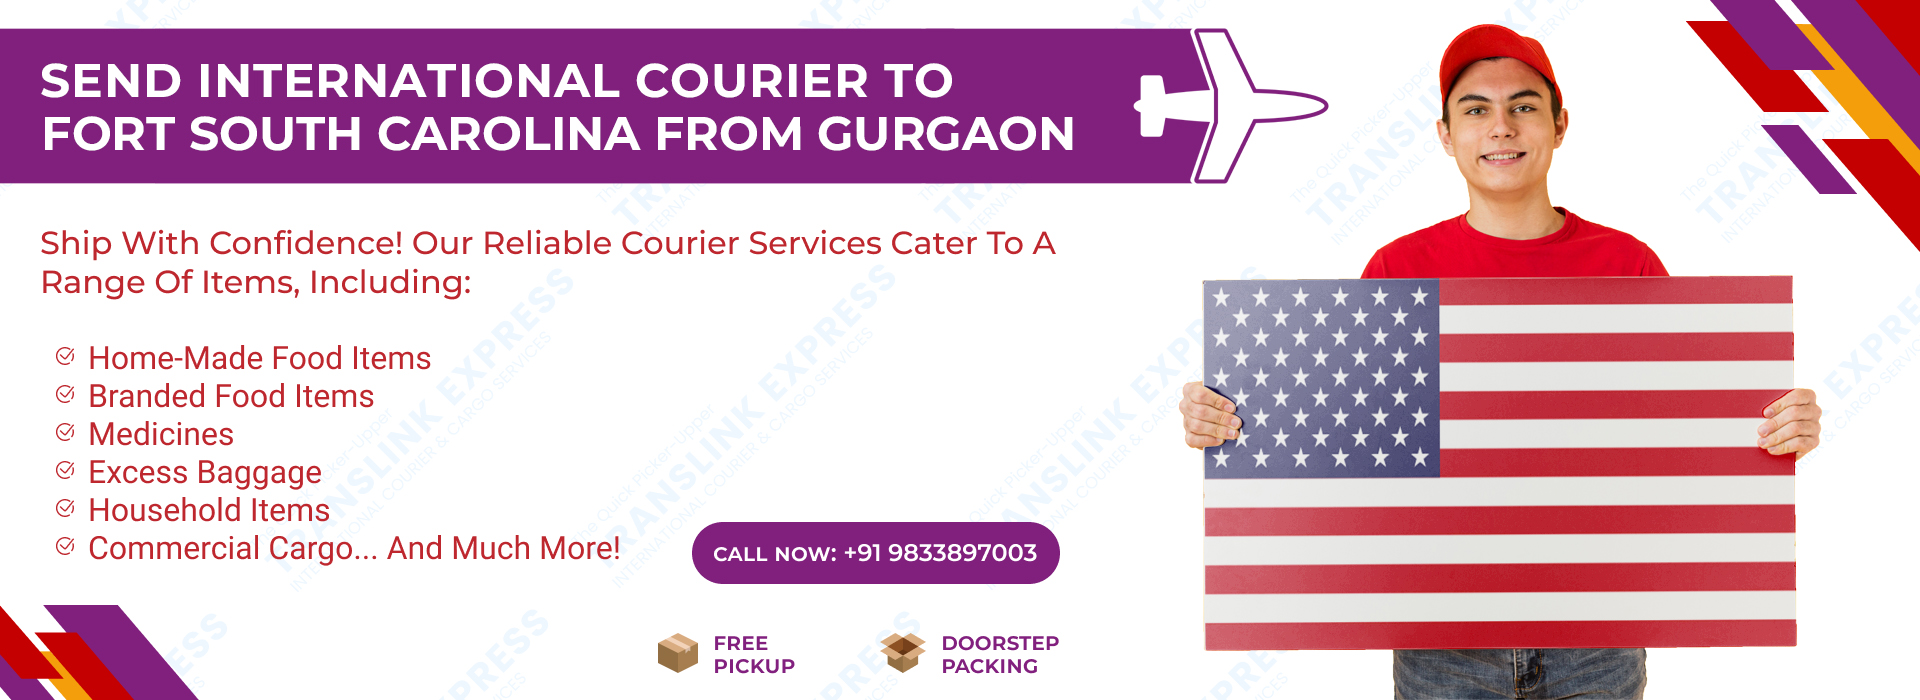 Courier to Fort South Carolina From Gurgaon